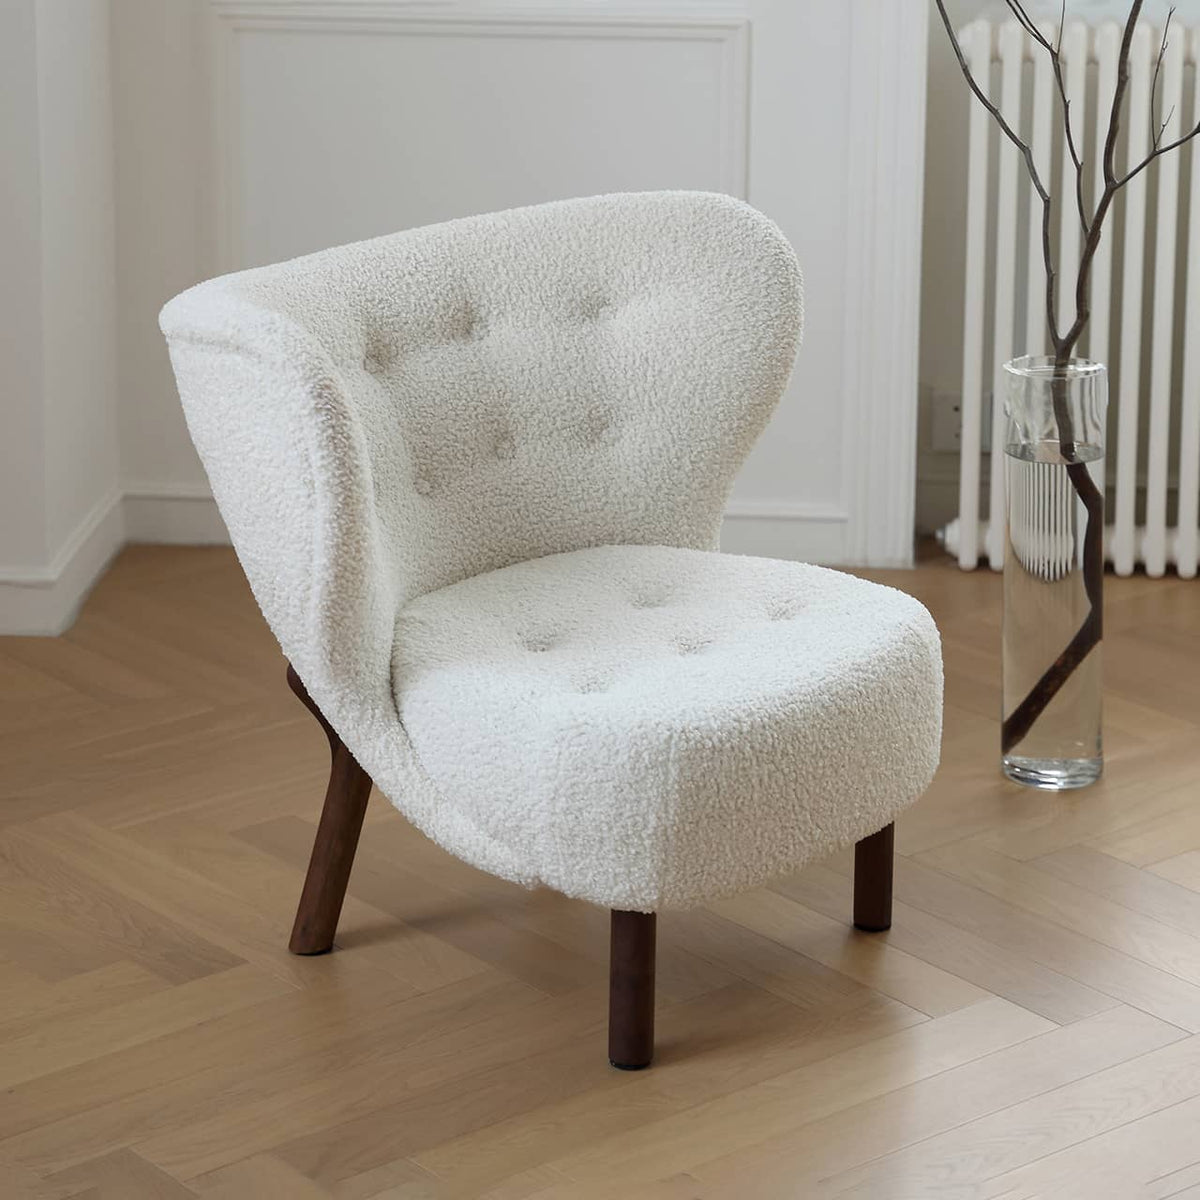 Luxurious White Walnut Wood Chair with Soft Faux Lambswool Upholstery my-361